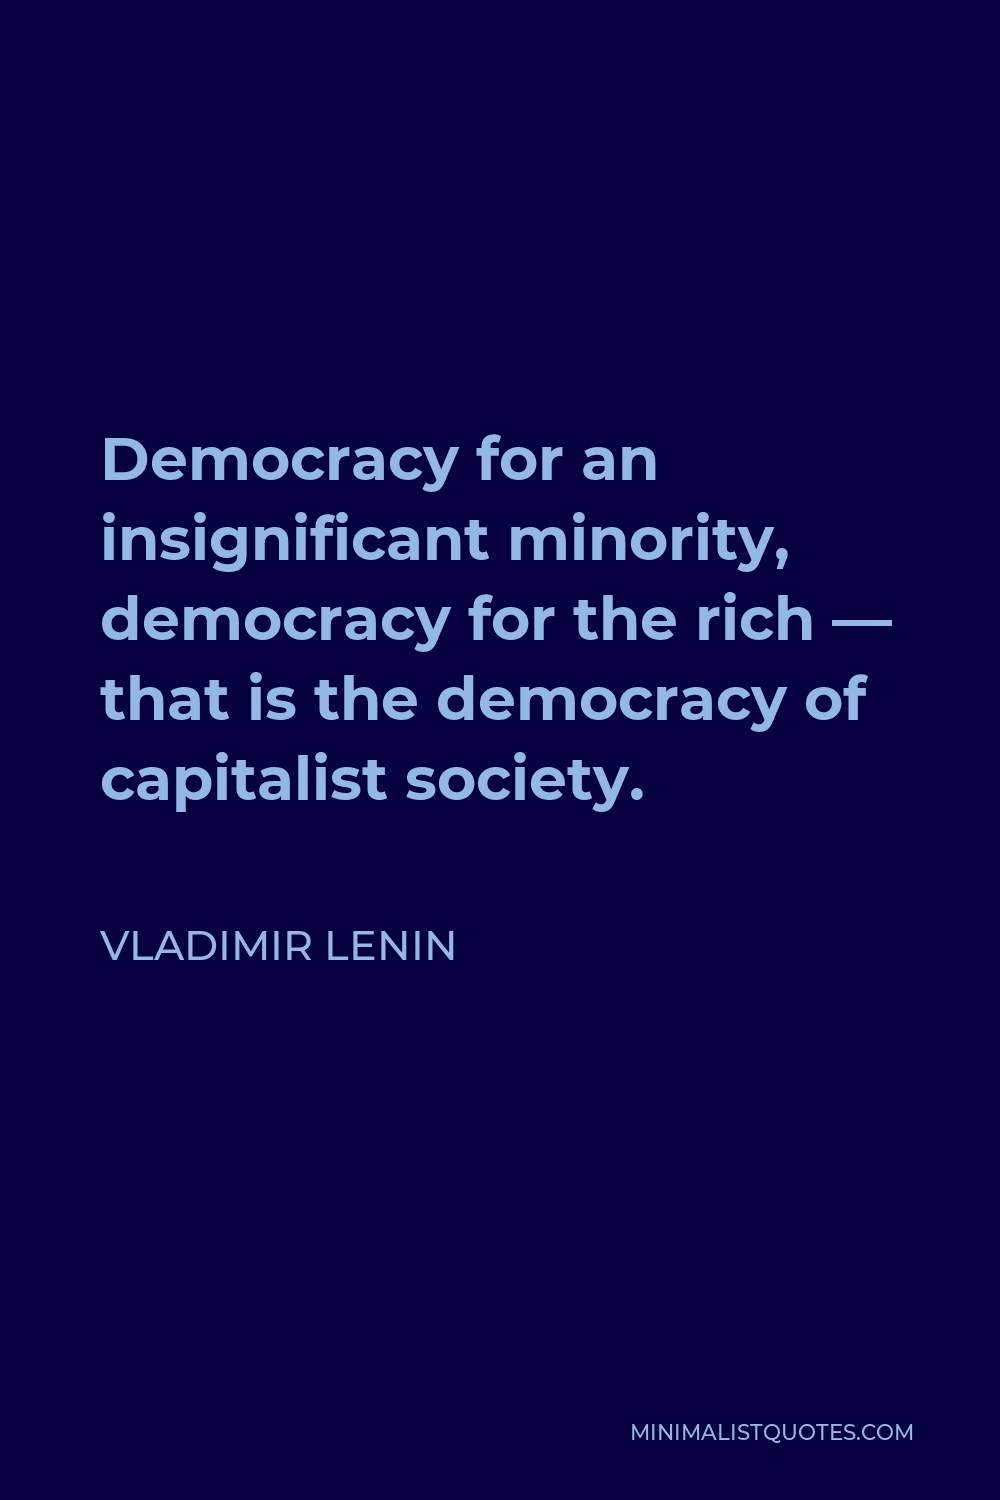 Vladimir Lenin Quote - Democracy for an insignificant minority, democracy for the rich — that is the democracy of capitalist society.